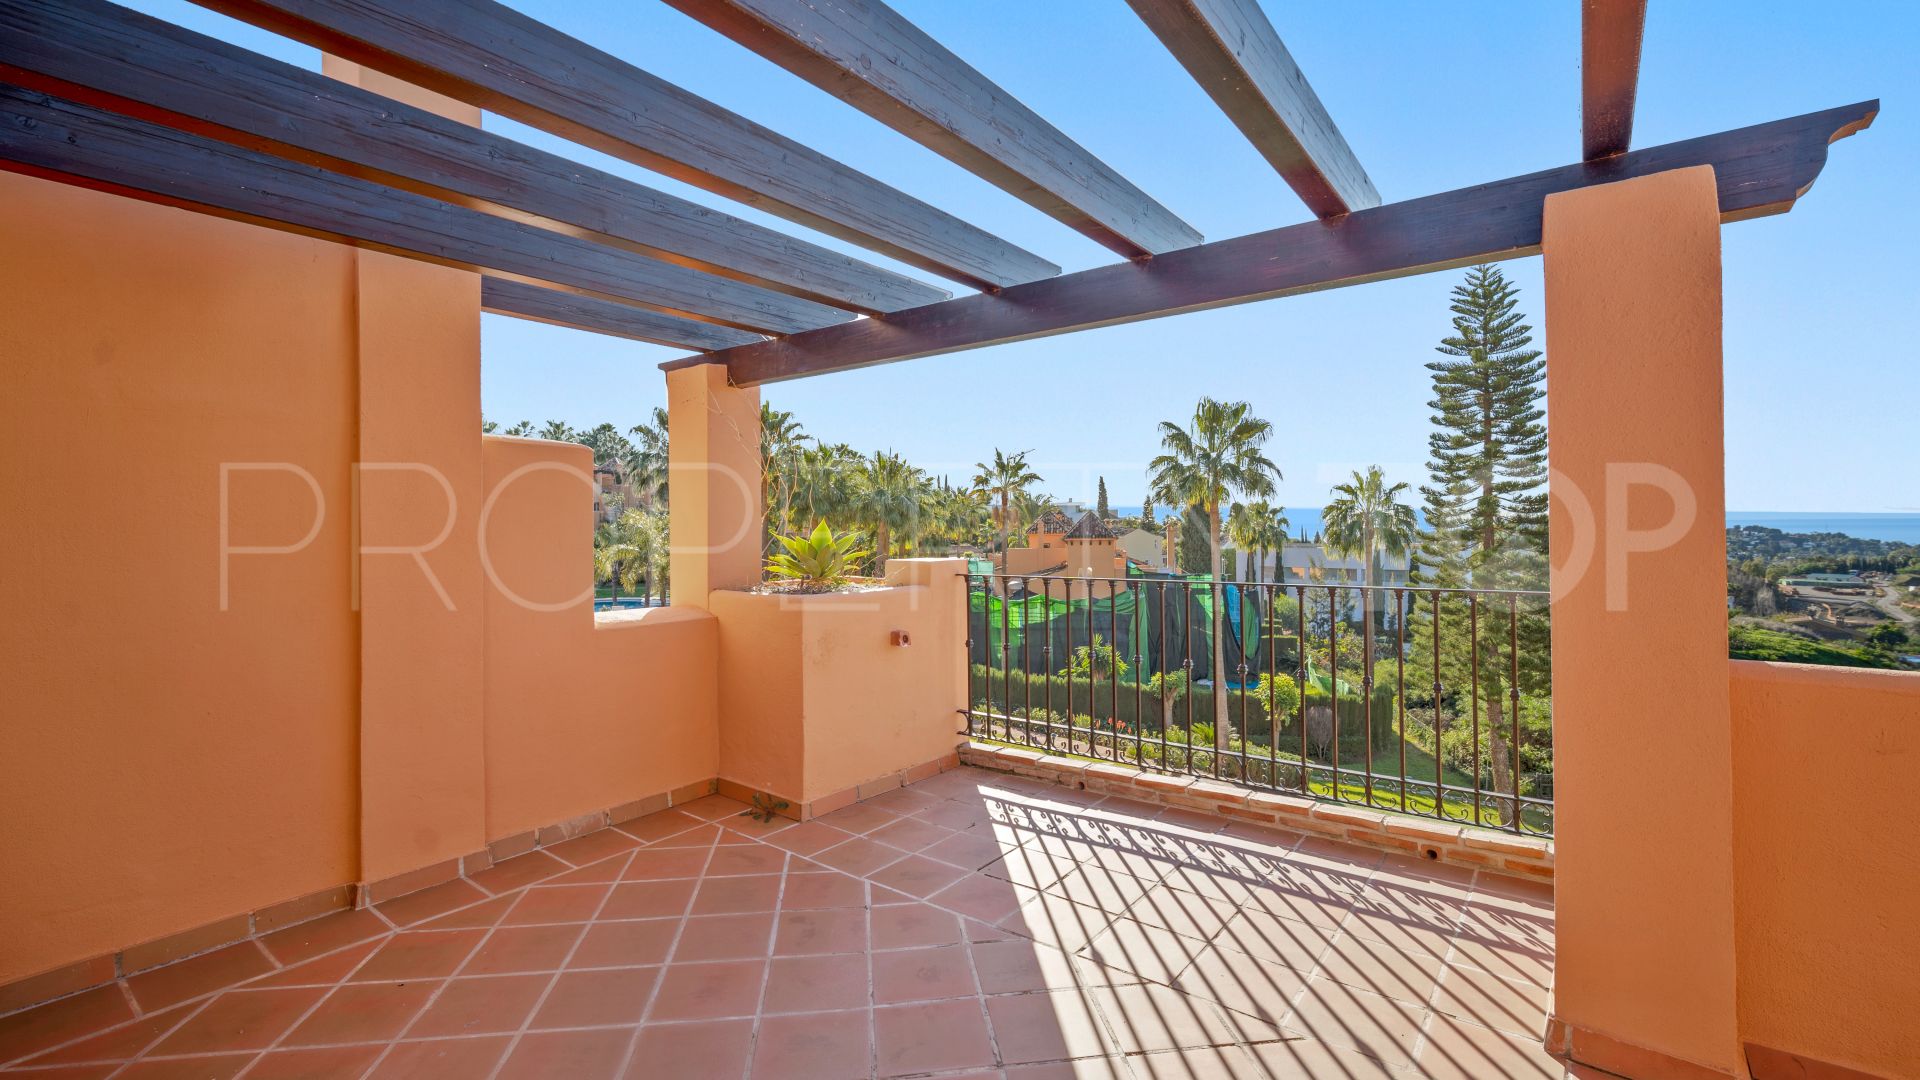 3 bedrooms Paraíso Bellevue town house for sale